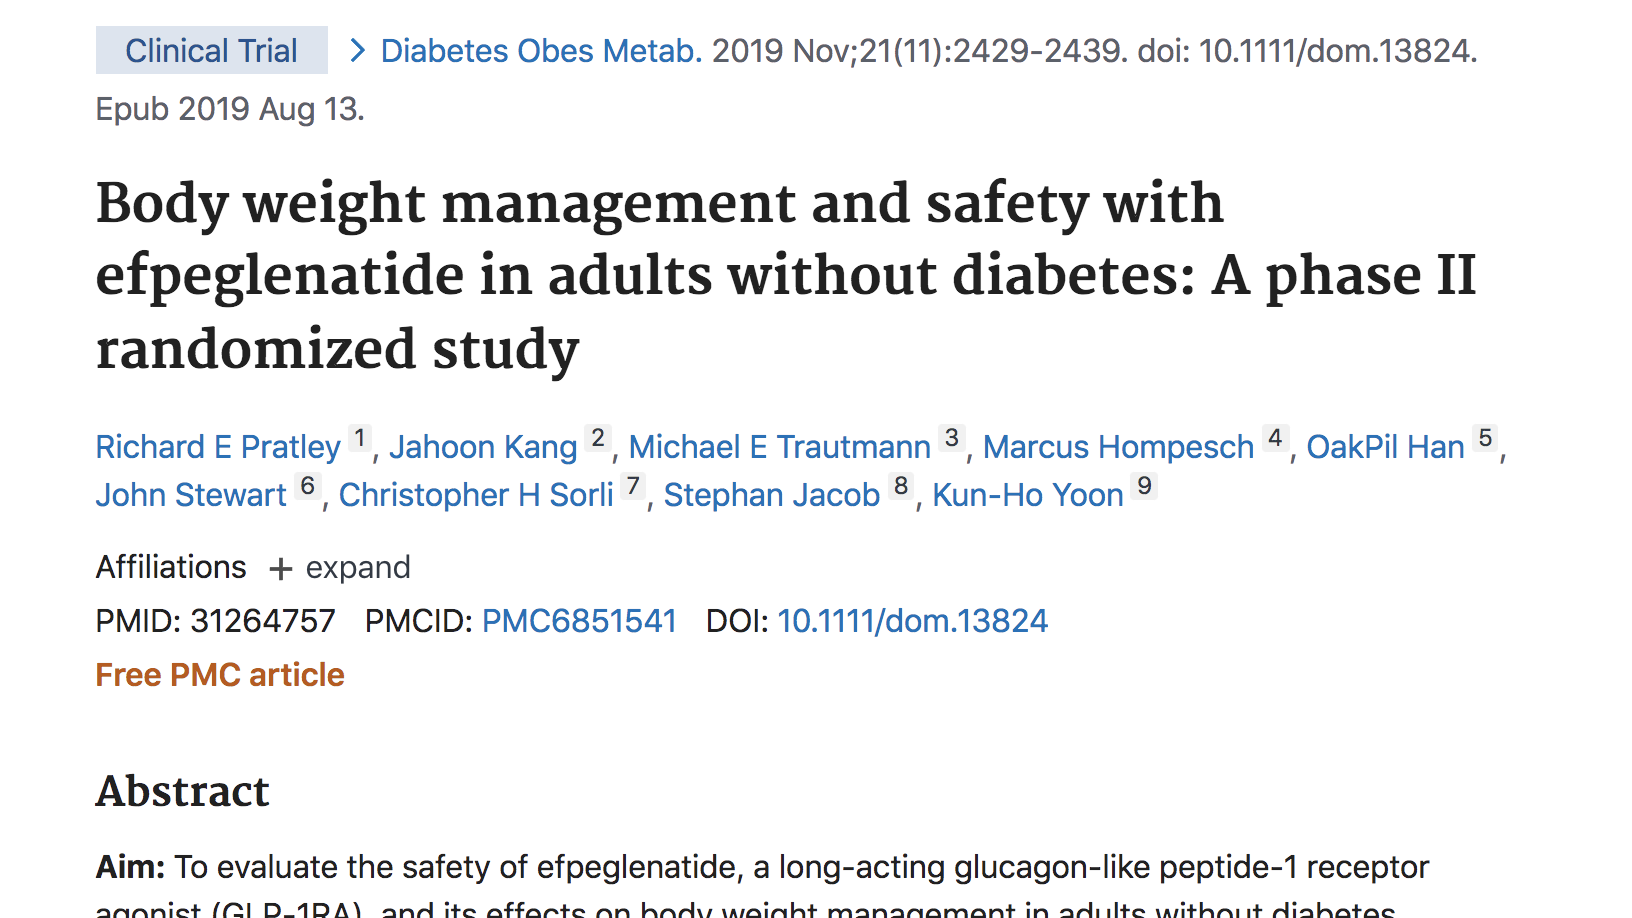 image of Body weight management and safety with efpeglenatide in adults without diabetes: A phase II randomized study